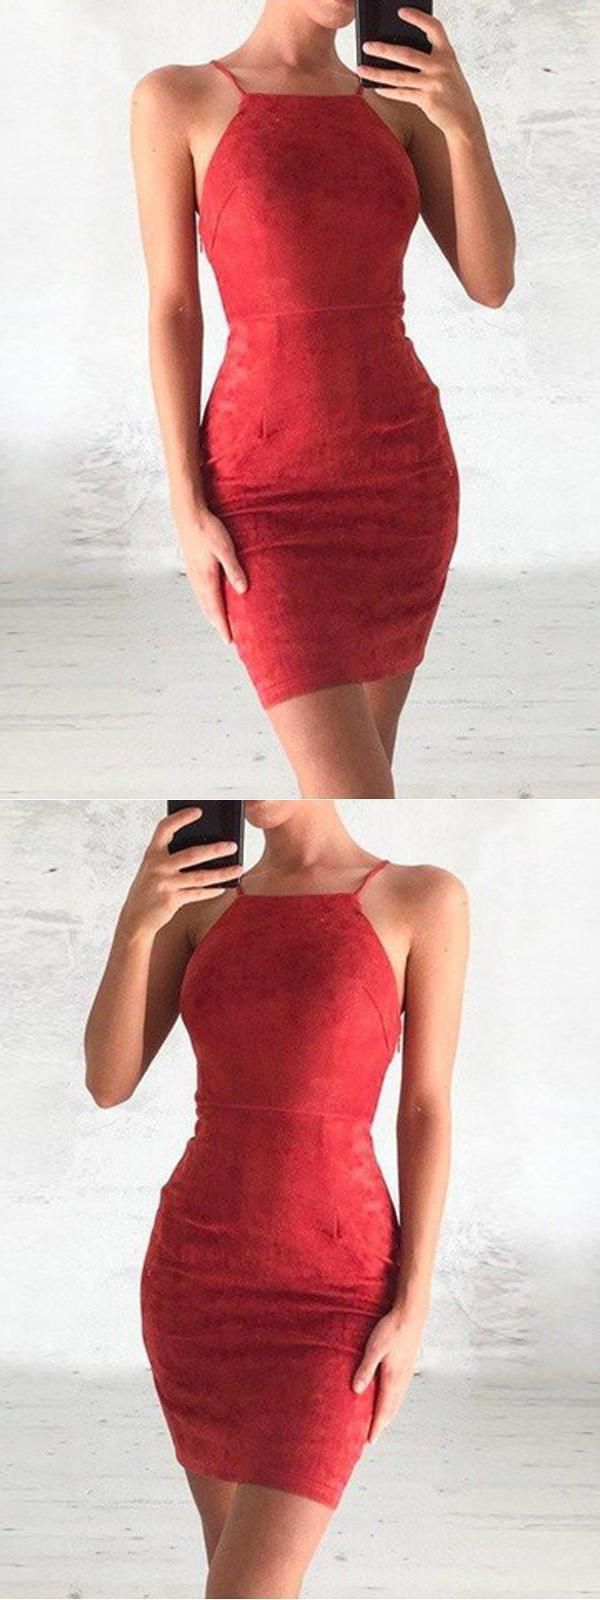 Luscious 2019 Homecoming Dresses, Red Lace Homecoming Dresses, Cheap Homecoming Dresses, Tight Homecoming Dresses -   15 dress Formal tight
 ideas